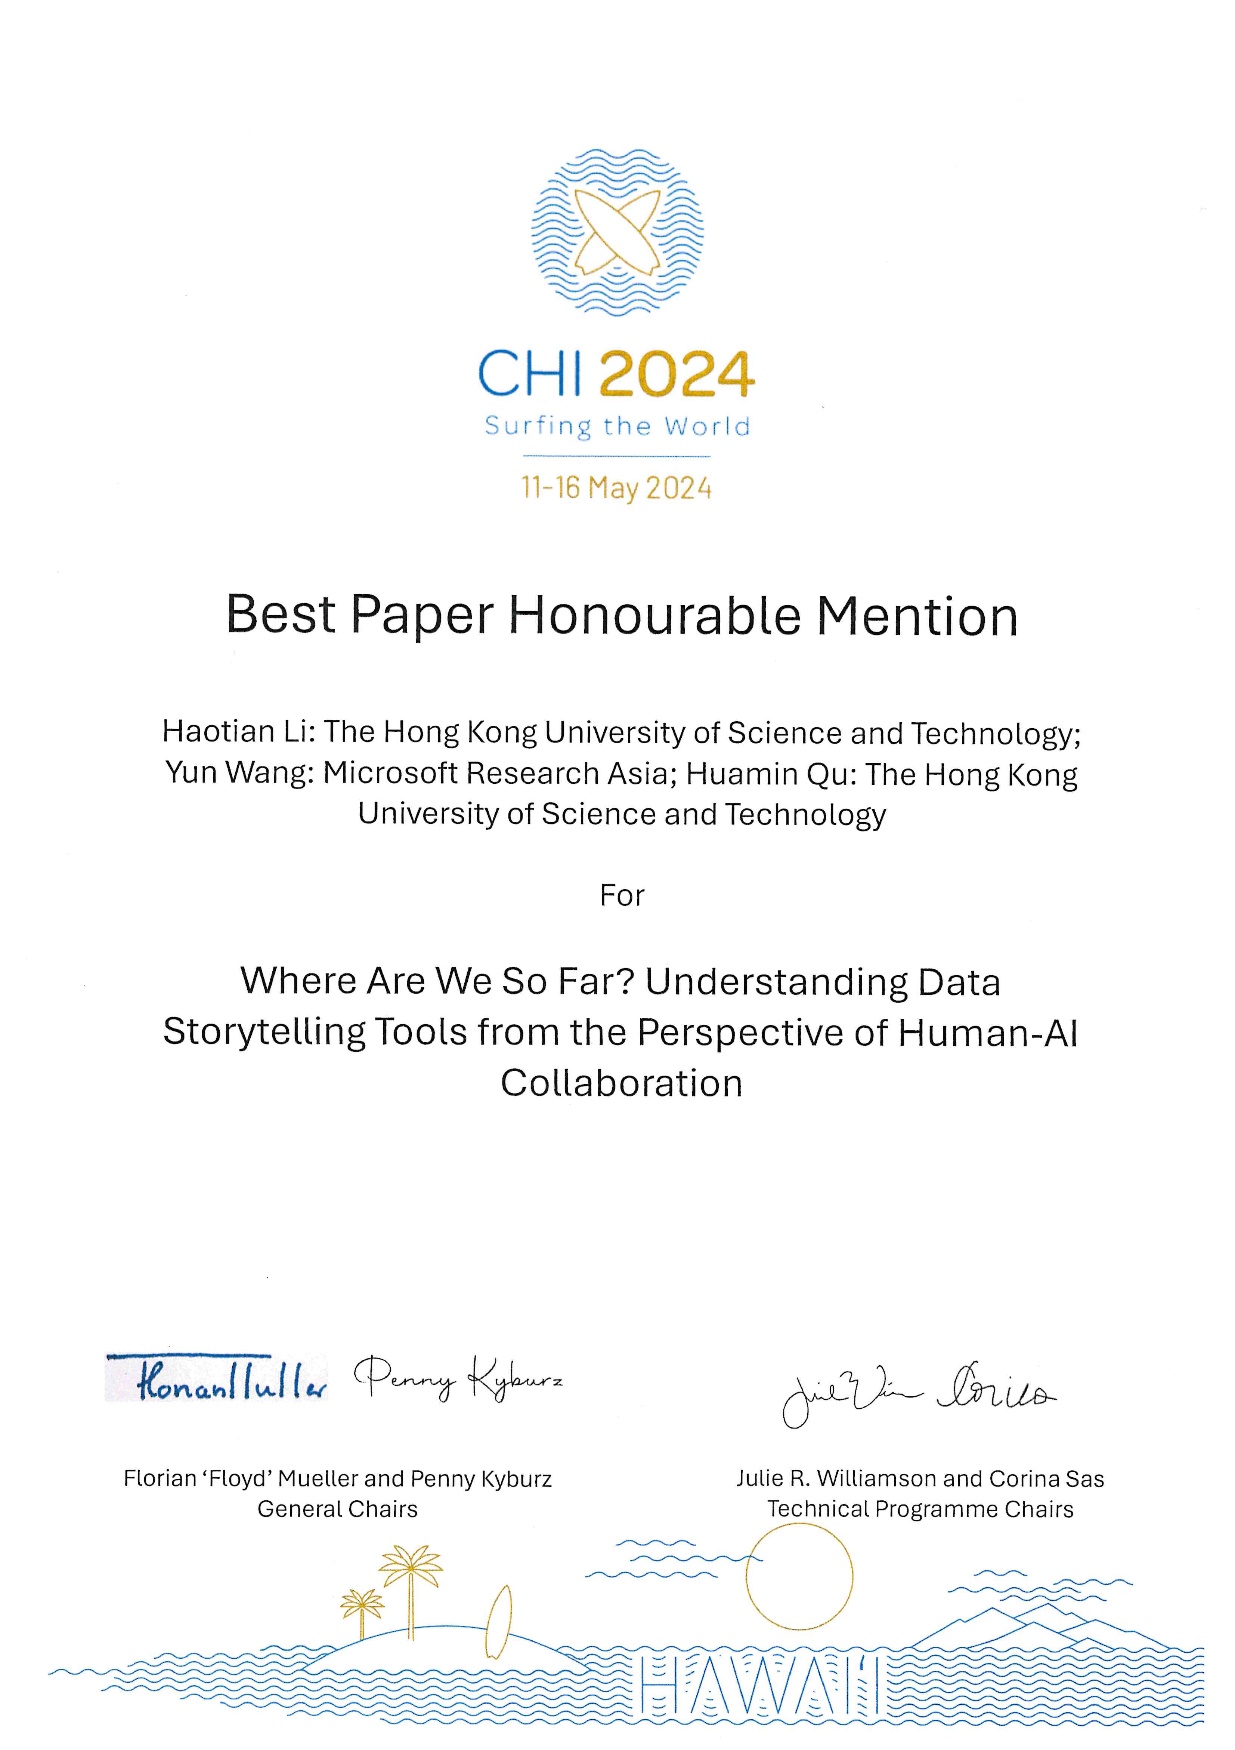 Certificate for the Best Paper Honourable Mention at CHI 2024